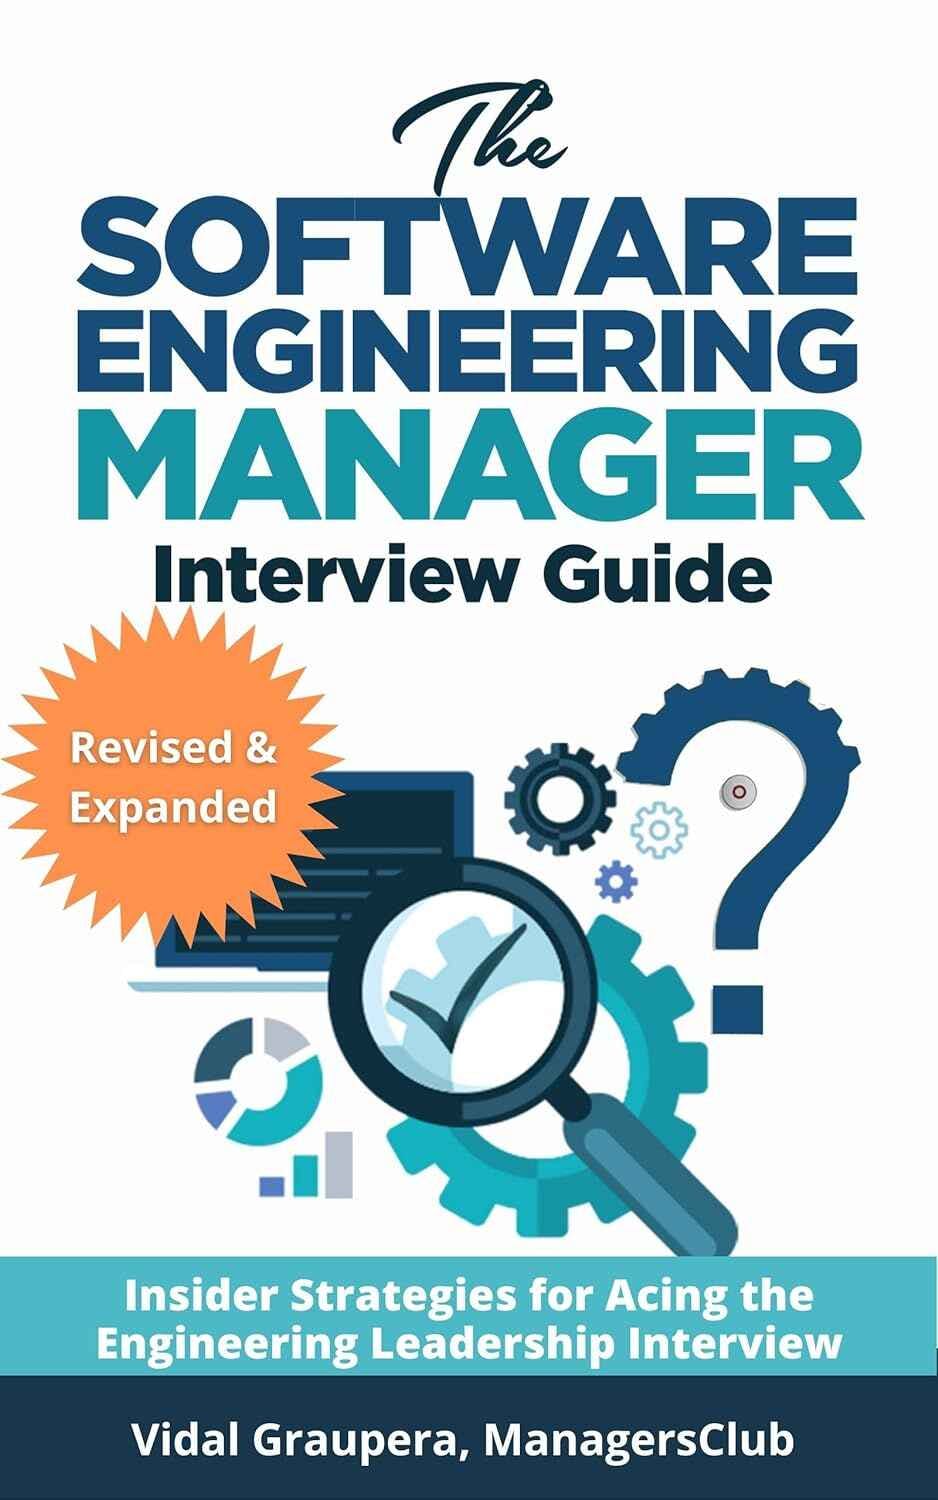 Book cover for 'Software engineering manager interview guide' - a comprehensive guide for interviewing candidates for software engineering manager positions